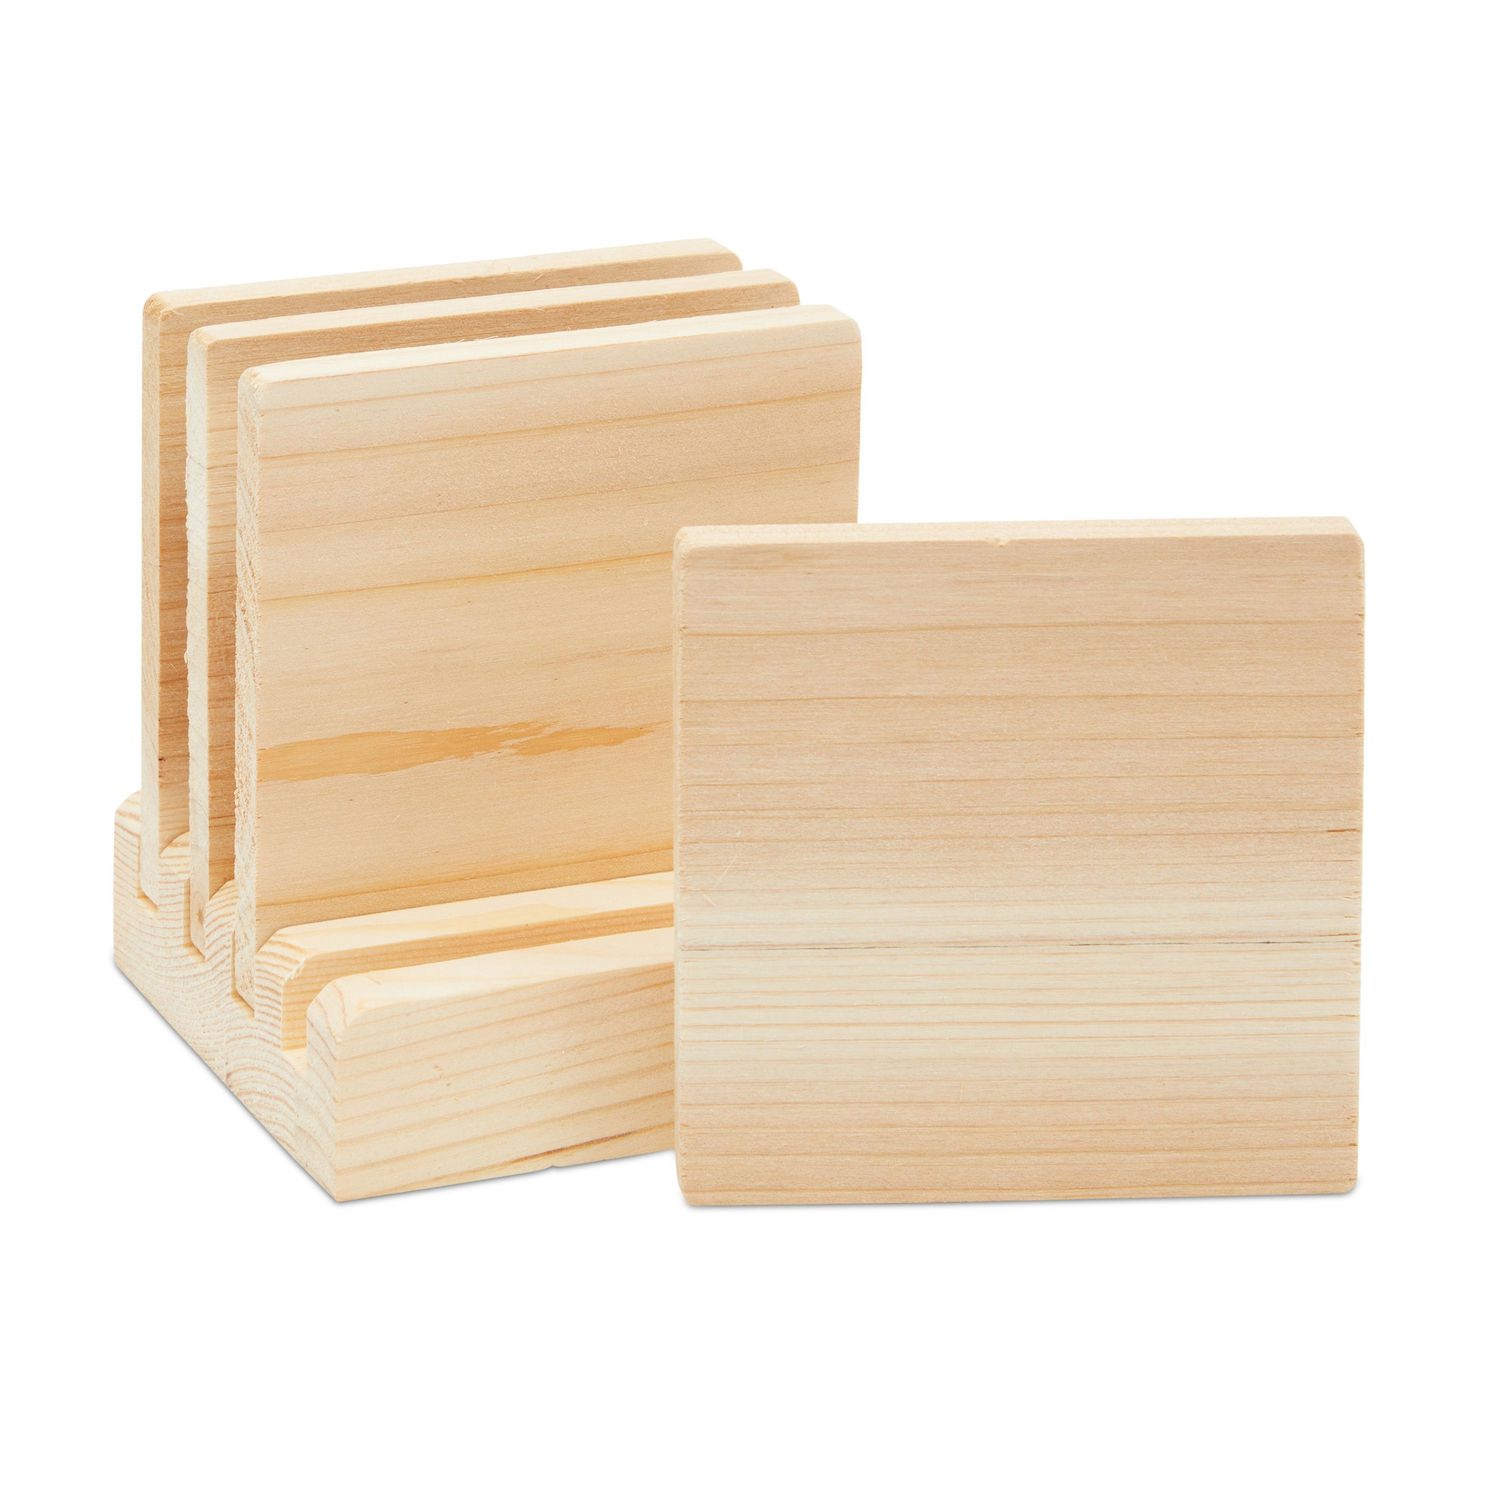 10 Pieces Unfinished Wood Coasters, 4 inch Round Acacia Wooden Coasters for Crafts with Non-Slip Silicon Dots for DIY Stained Painting Wood